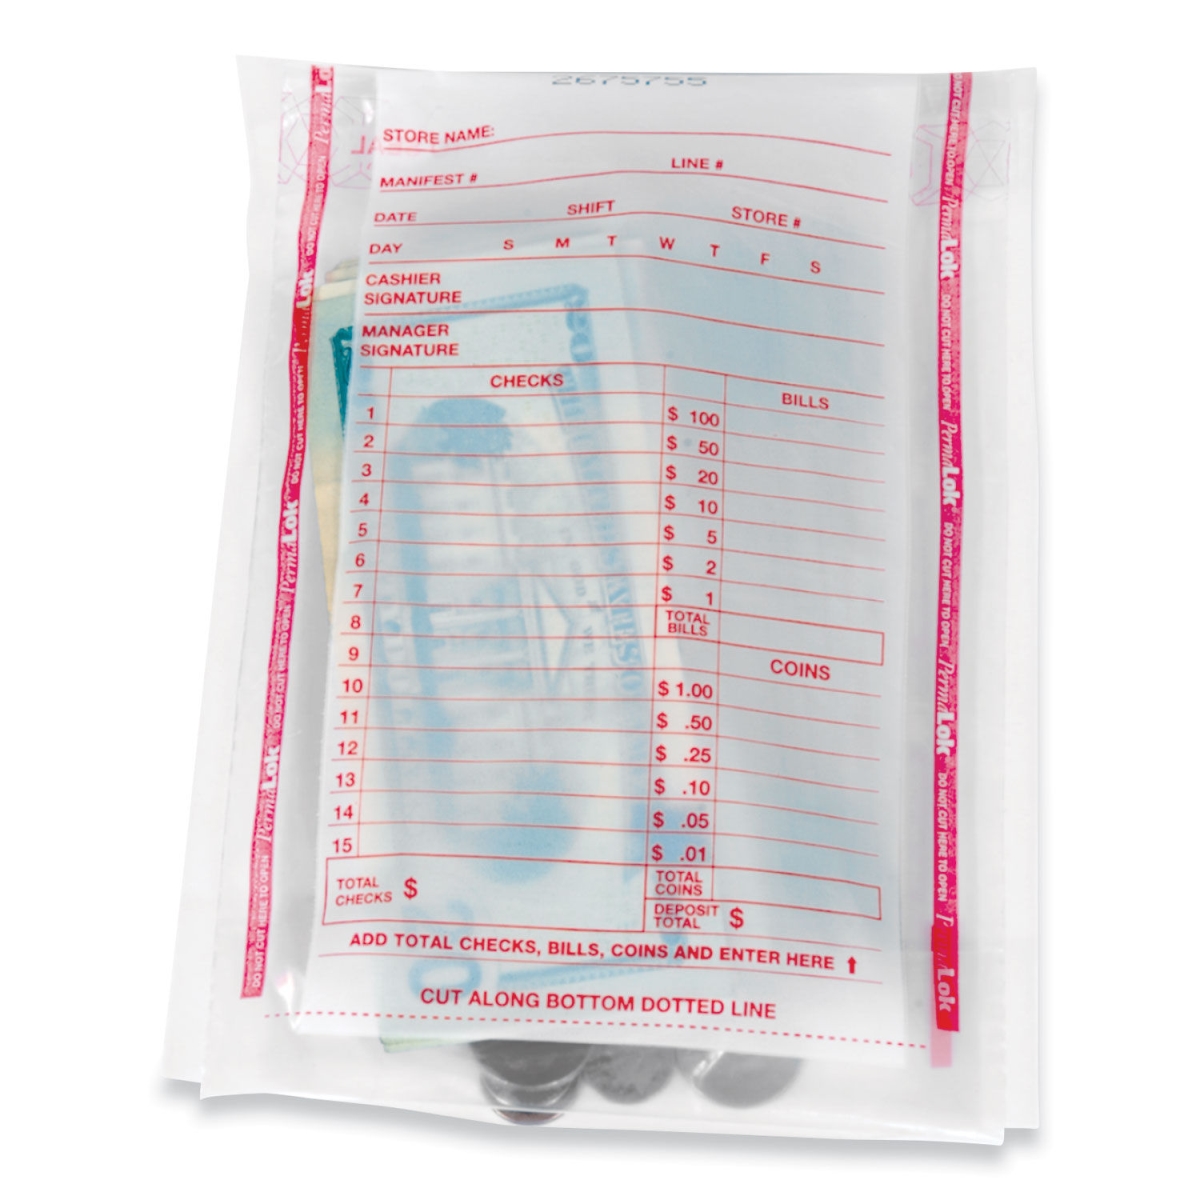 Picture of Permalok CNK585013 5.75 x 8.75 in. Transmit Cash Deposit Bag, Clear - Pack of 1000